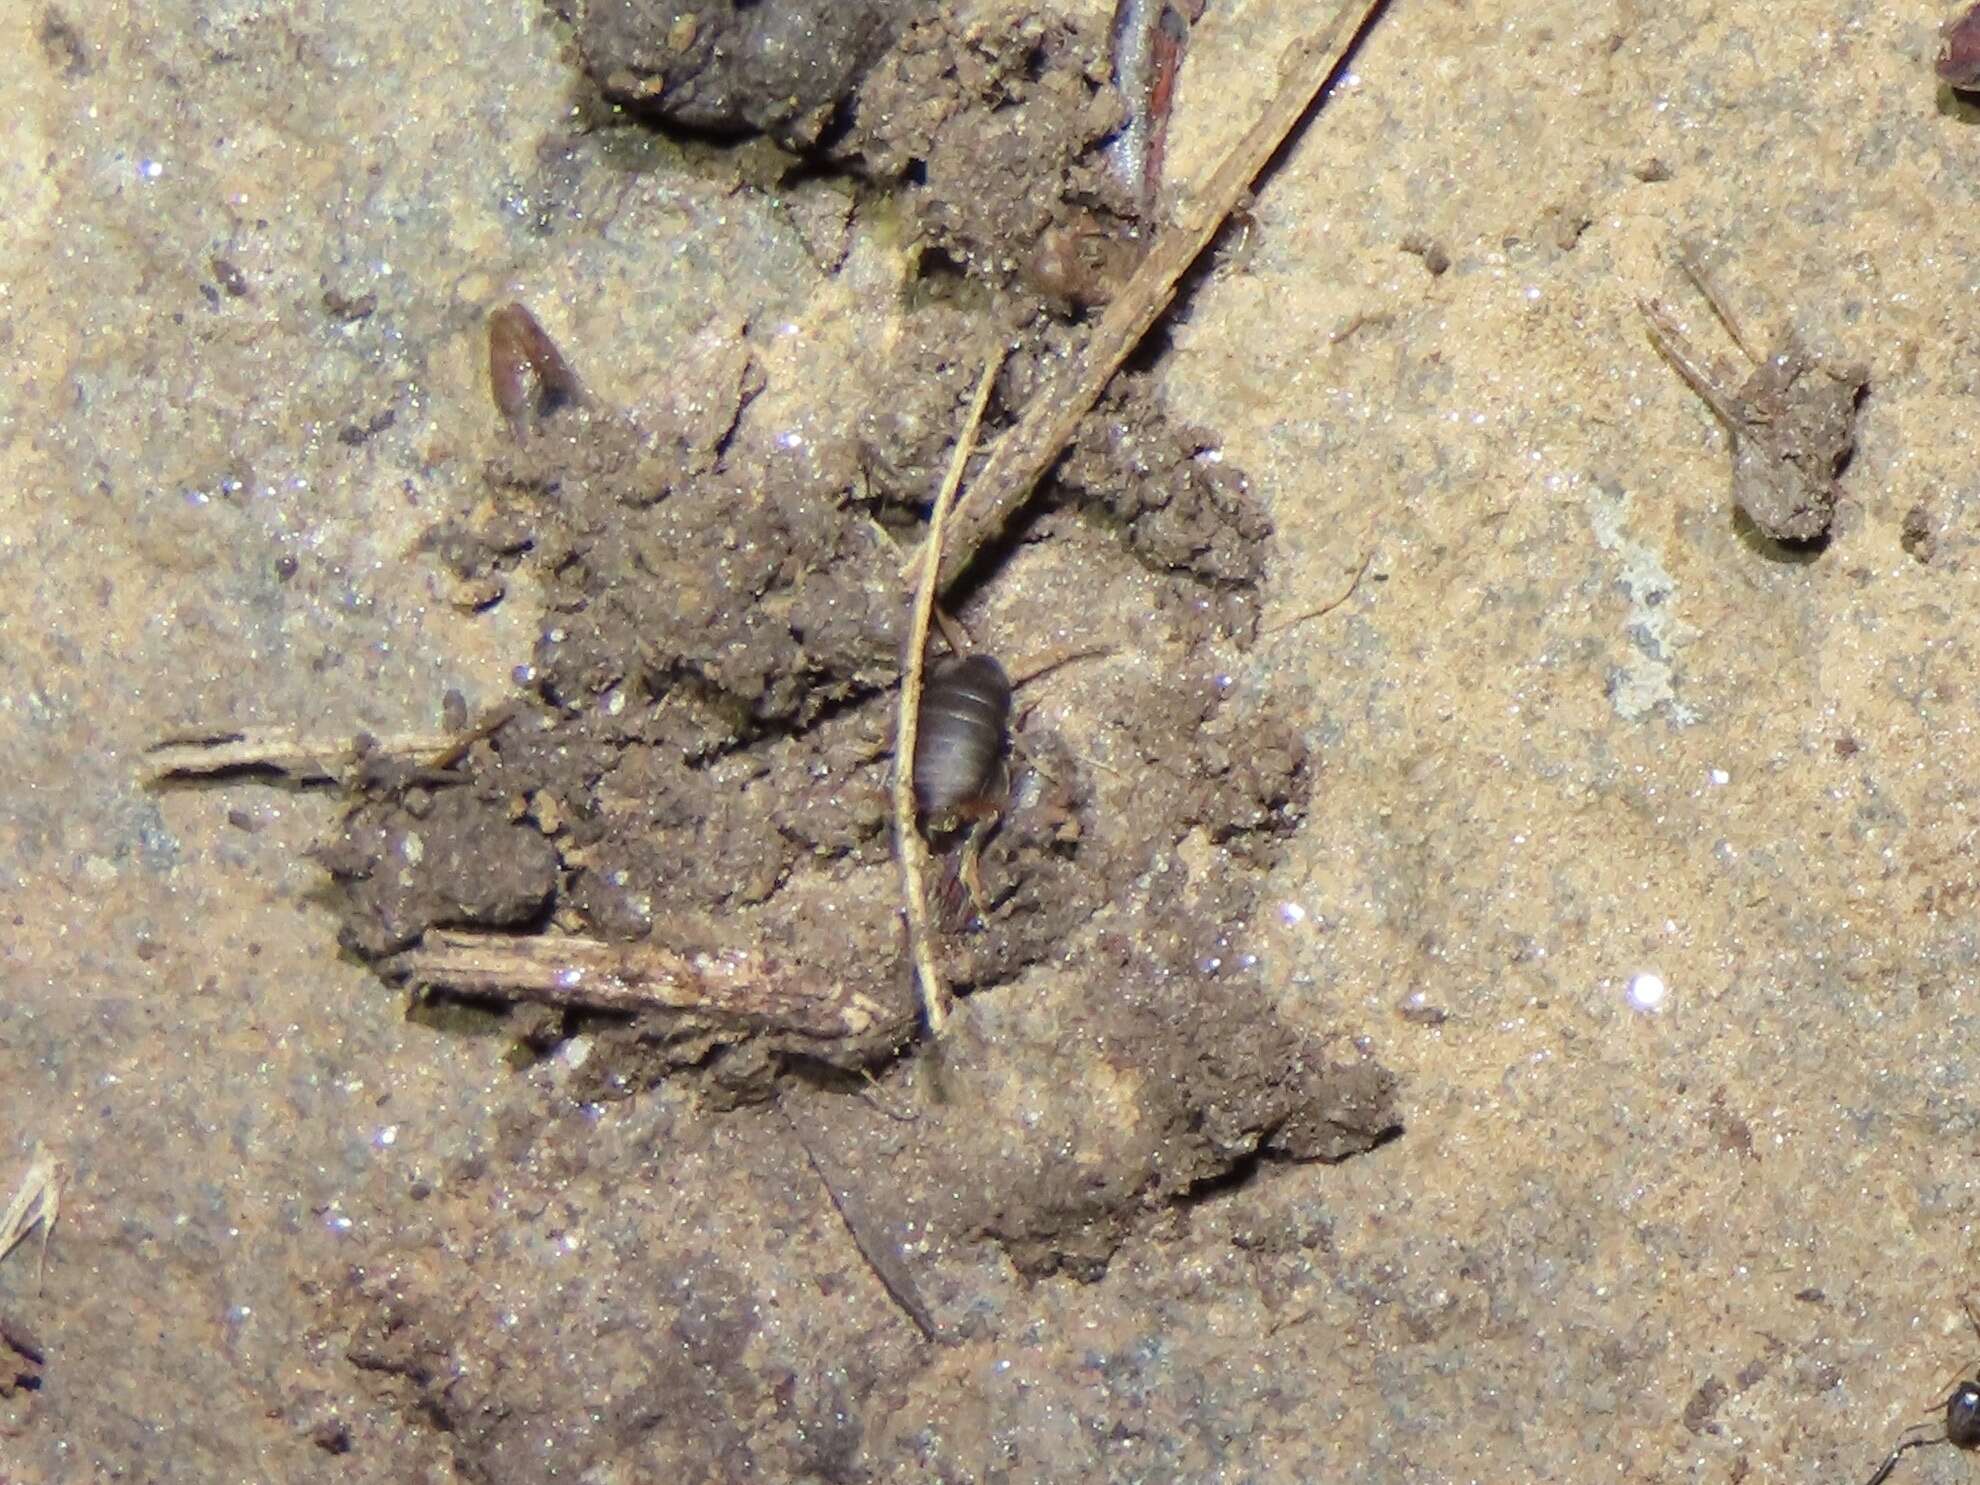 Image of Eastern Ant Cricket